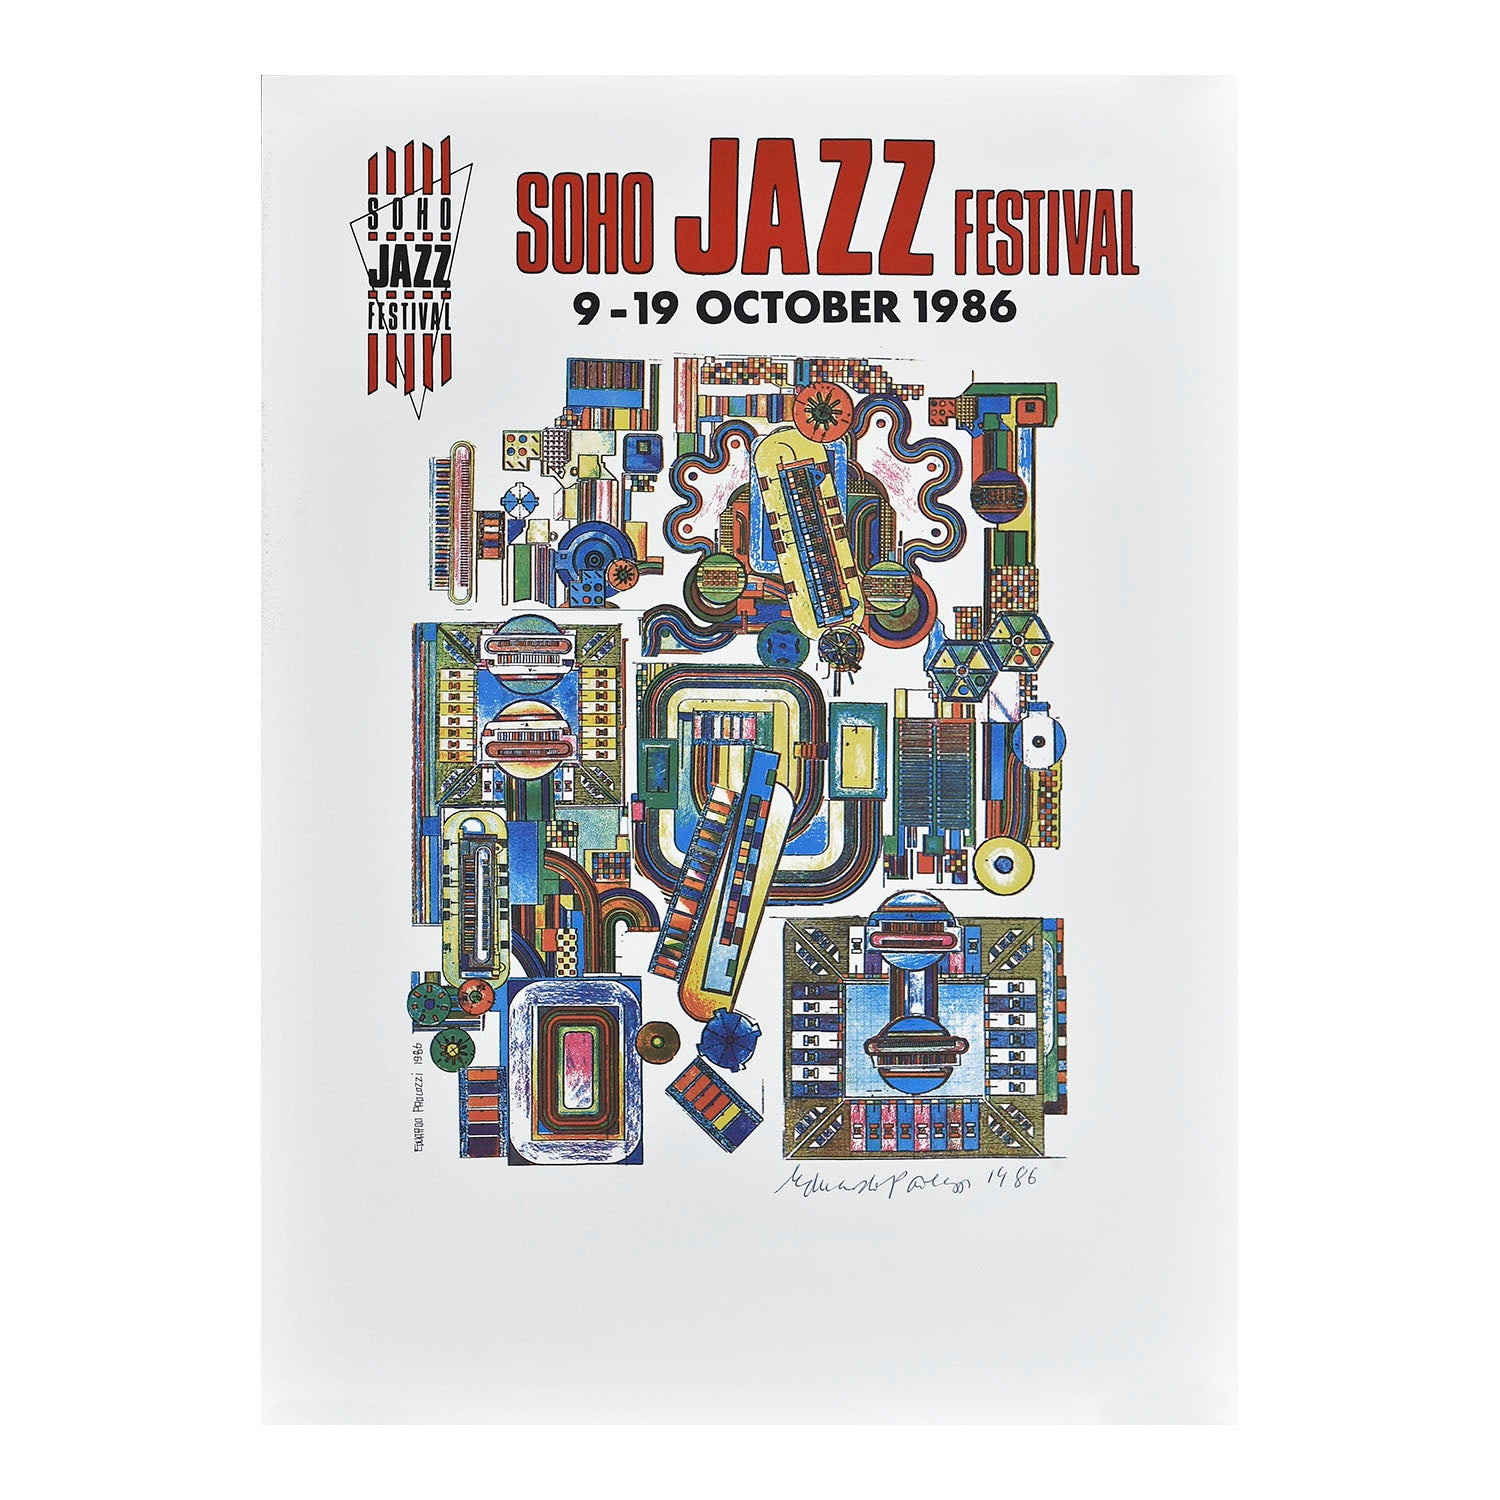 An original hand-signed & limited edition screen print for the 1986 Soho Jazz Festival by Eduardo Paolozzi.